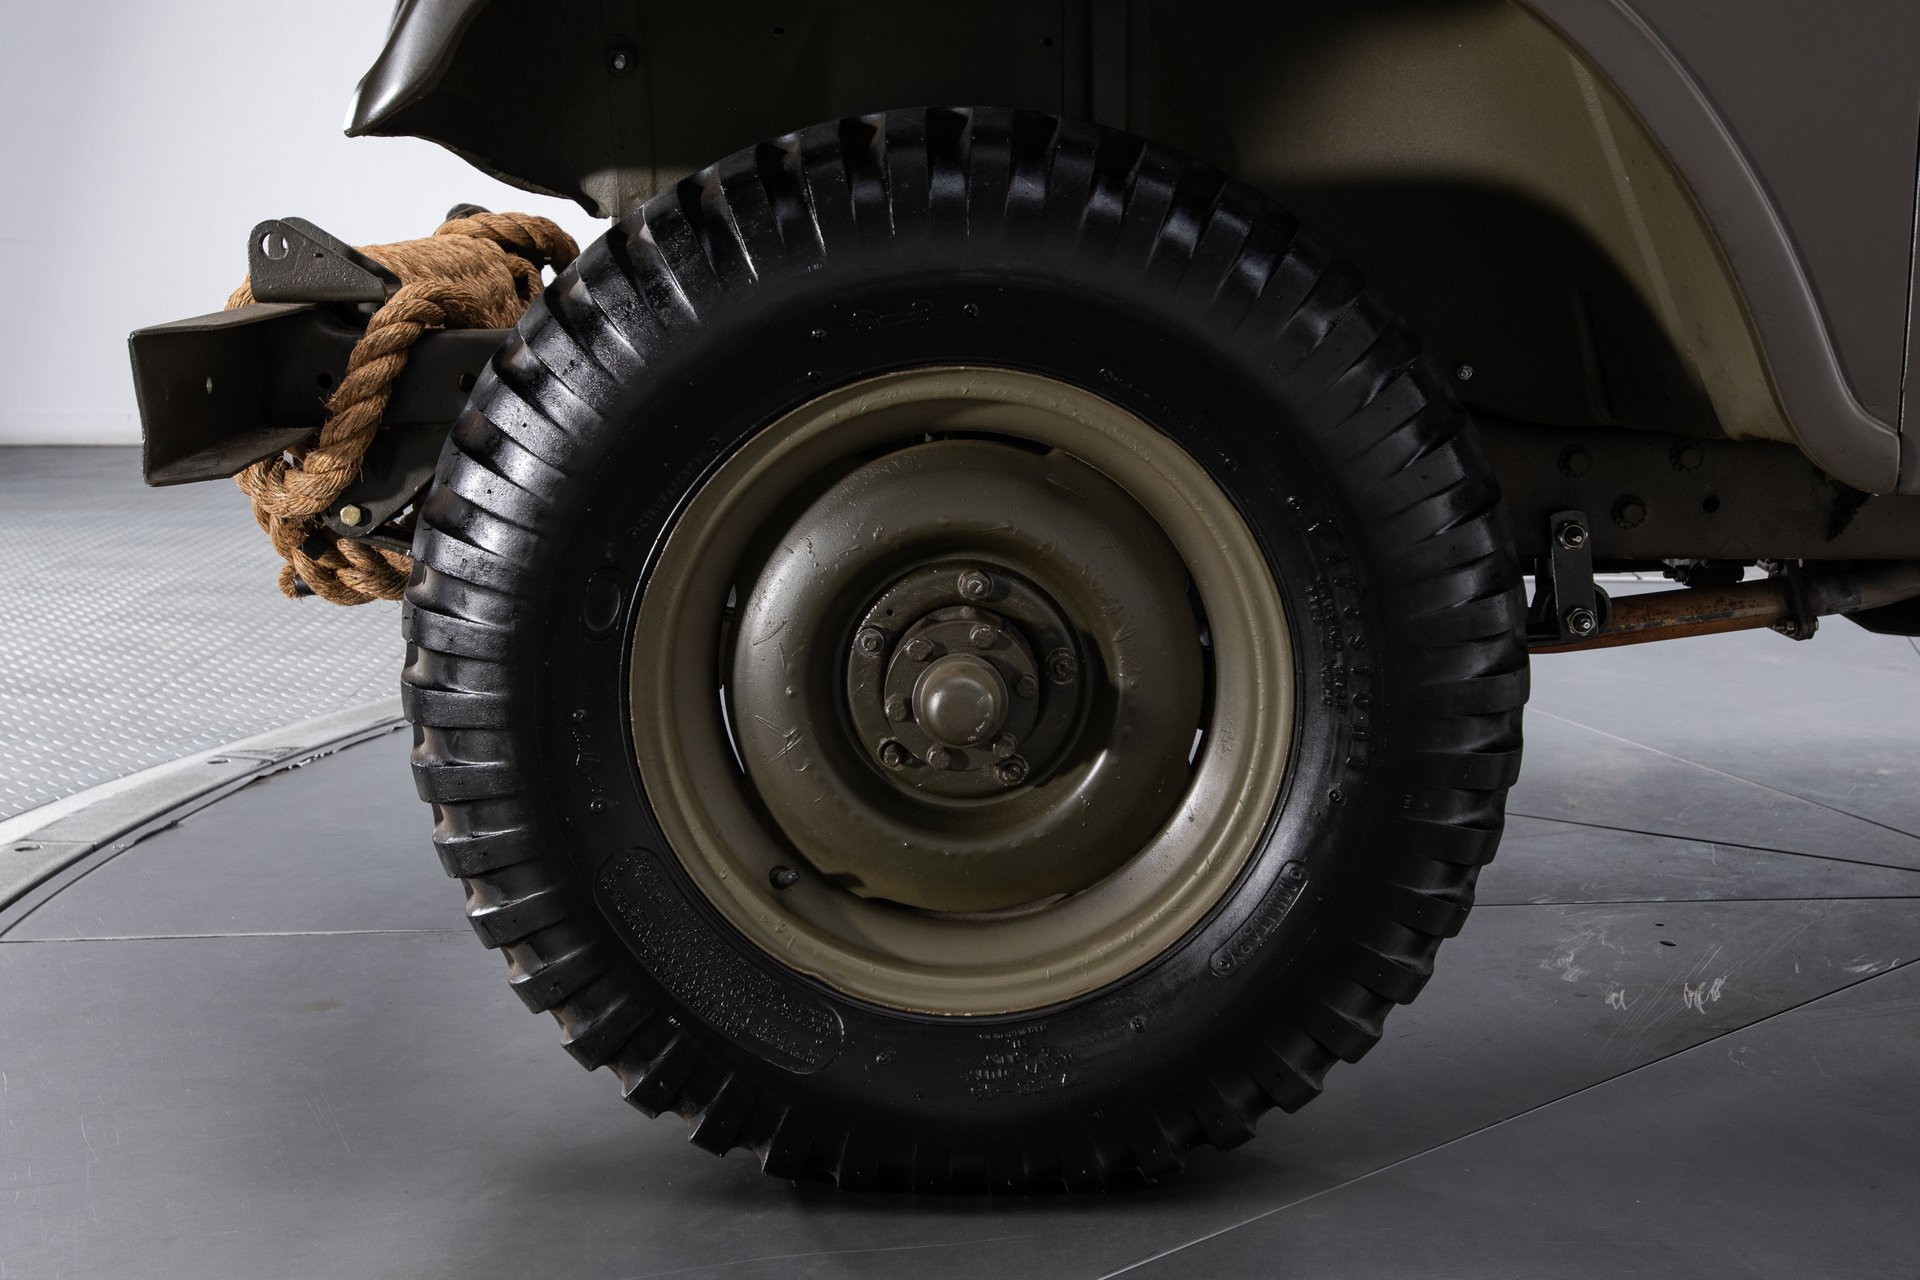 1953 willys m38a1 military jeep